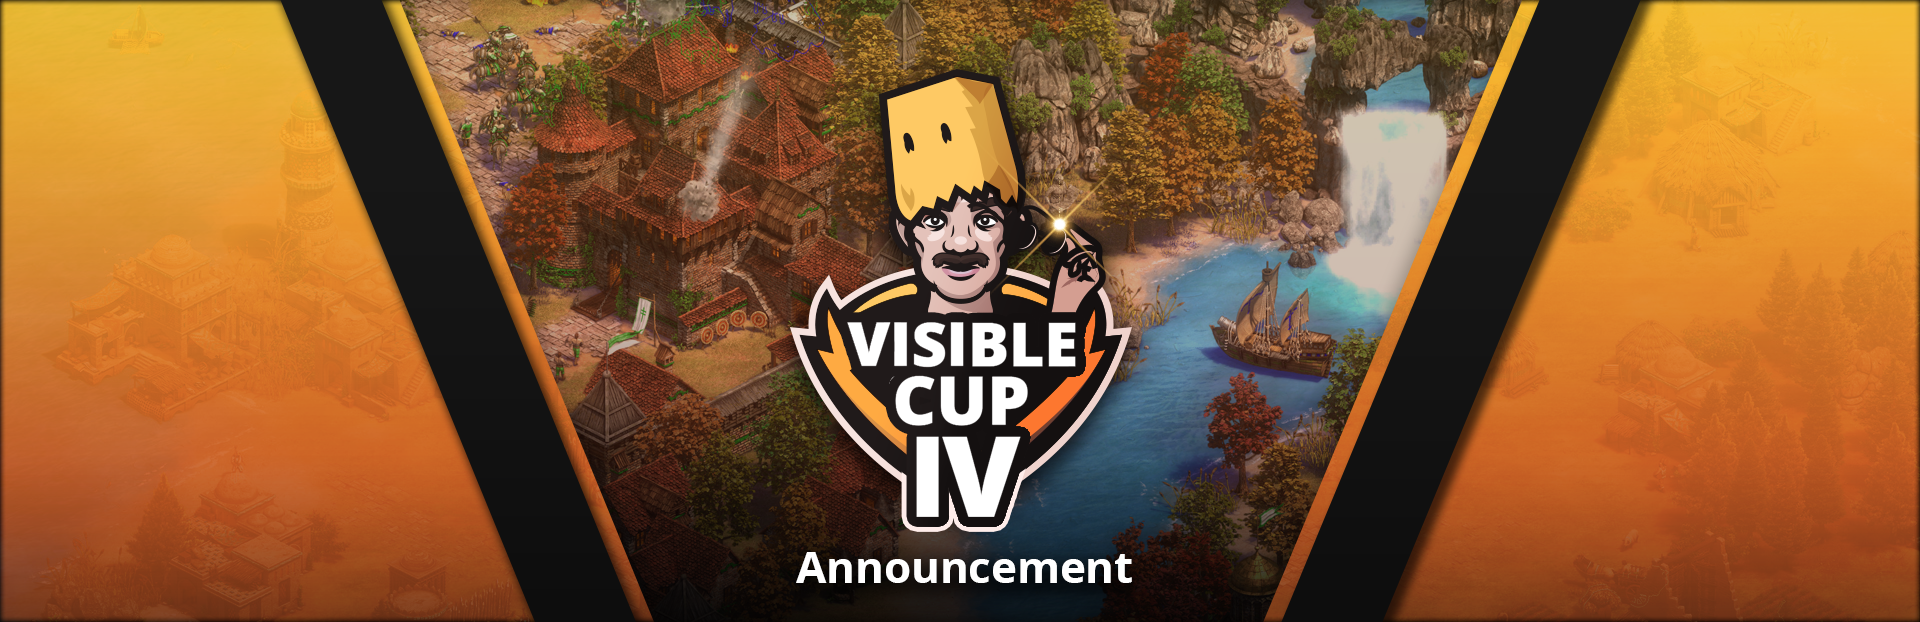 Visible Cup - Announcement.png